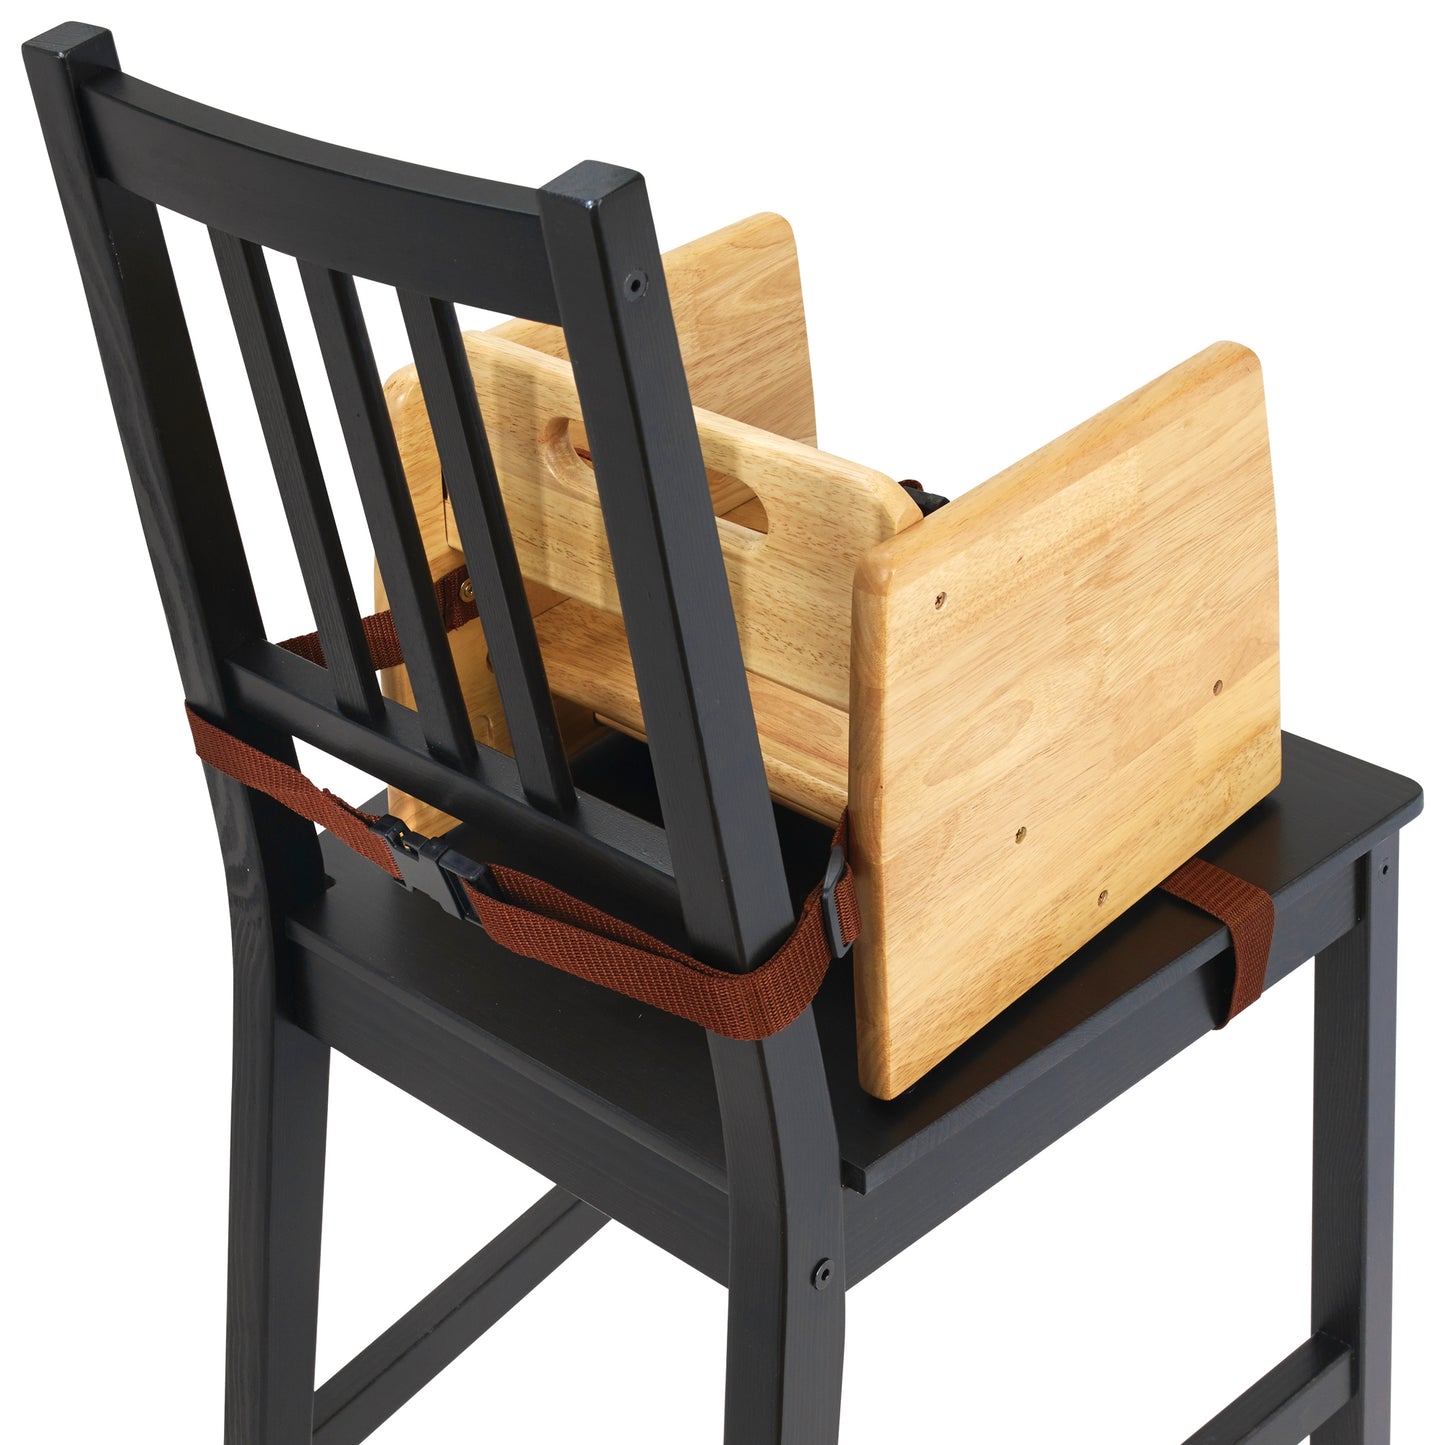 CHB-701 - Stacking Wooden Booster Seat - Natural